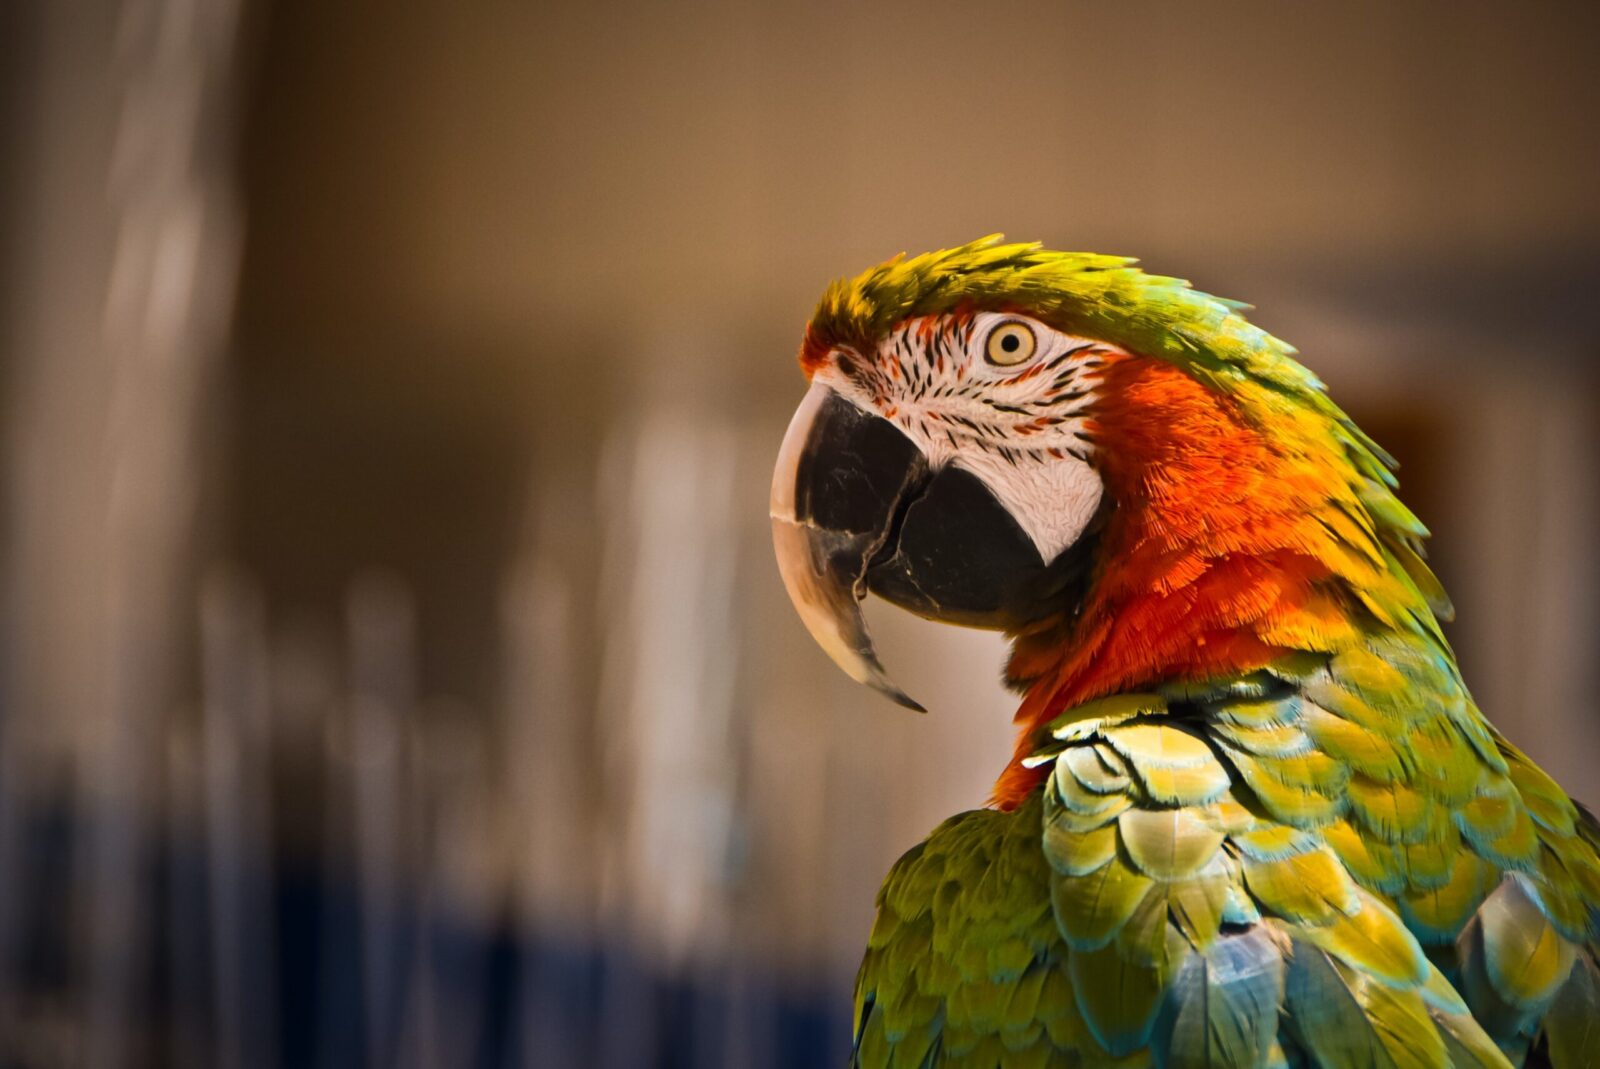 How many species of Macaws are there?